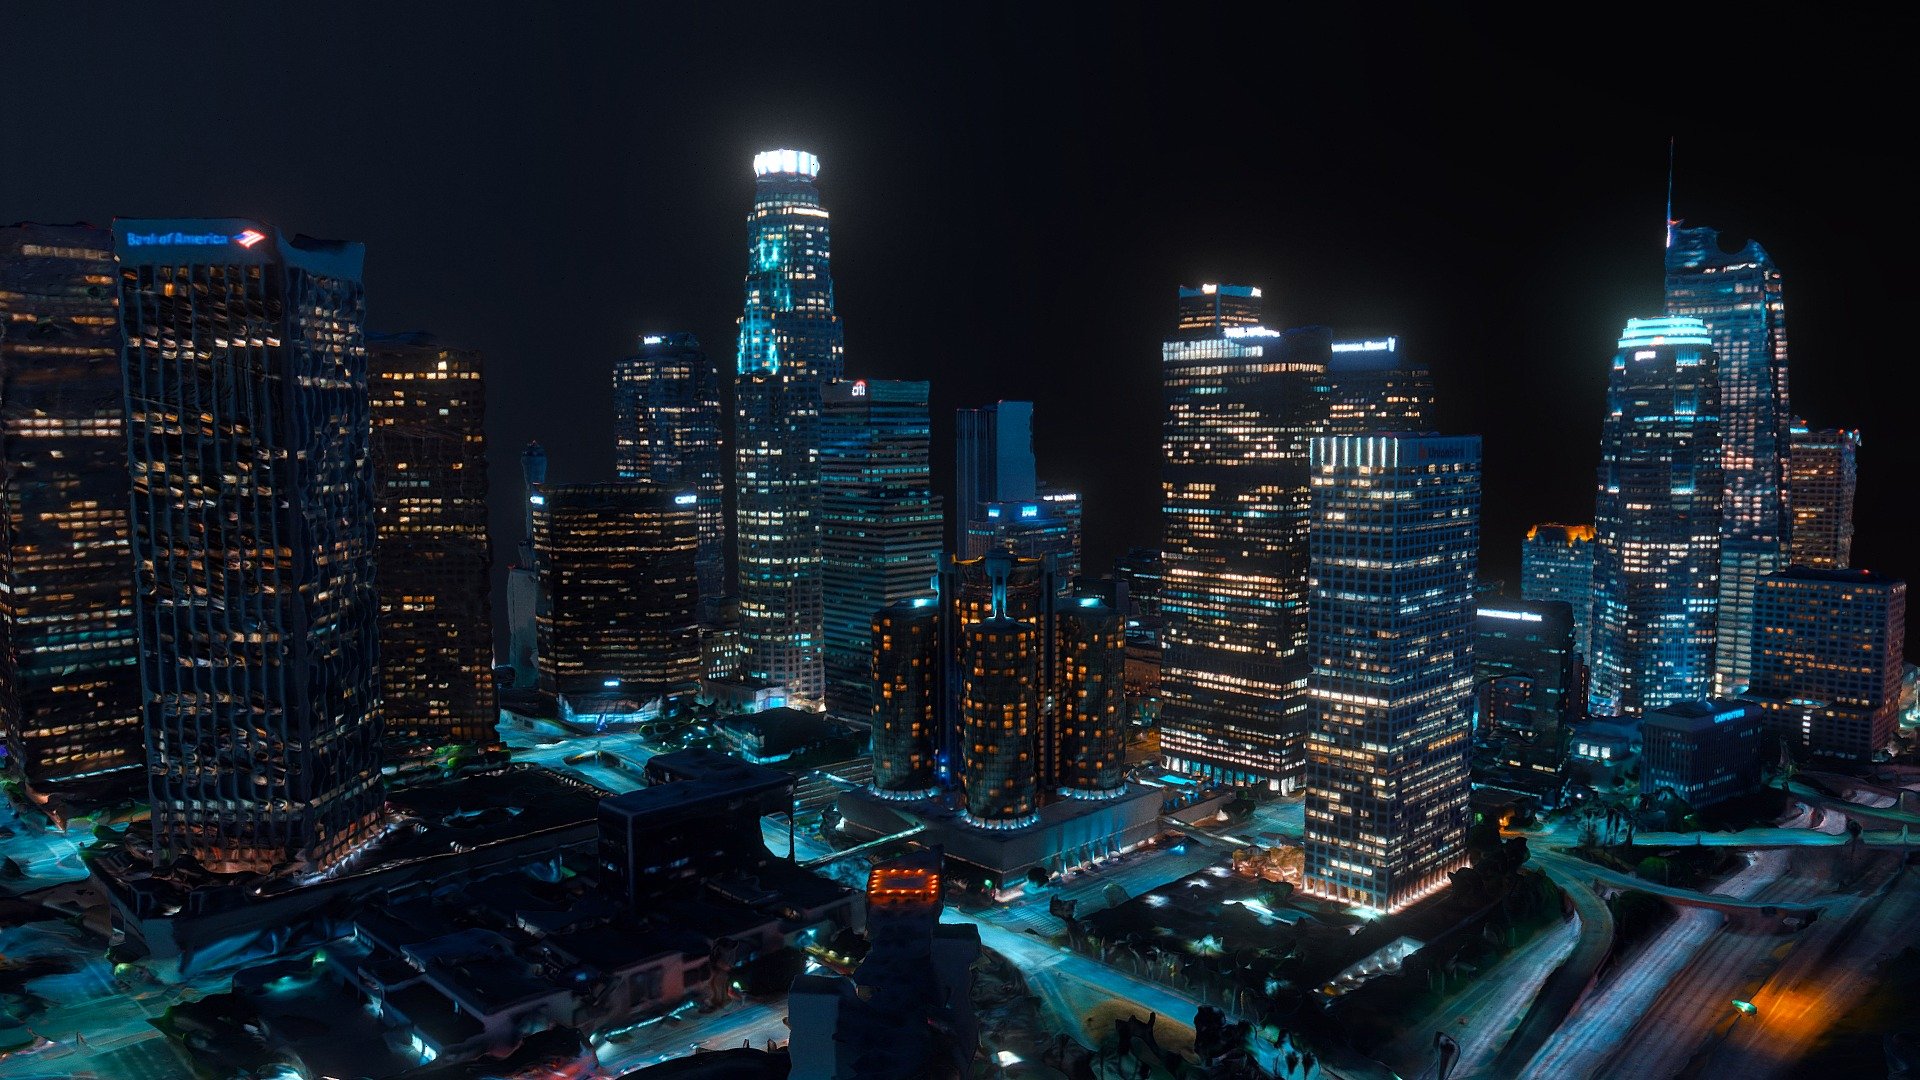 LA Los Angeles night city megalopolis downtown cloudscape panorama

Experimental vr, reconstructed solely from 8K drone footage, 4x8K  textures

Please ko-fi.com/333ddd if you download and enjoy - LA Night City - Download Free 3D model by FUD-UJEP 3d model